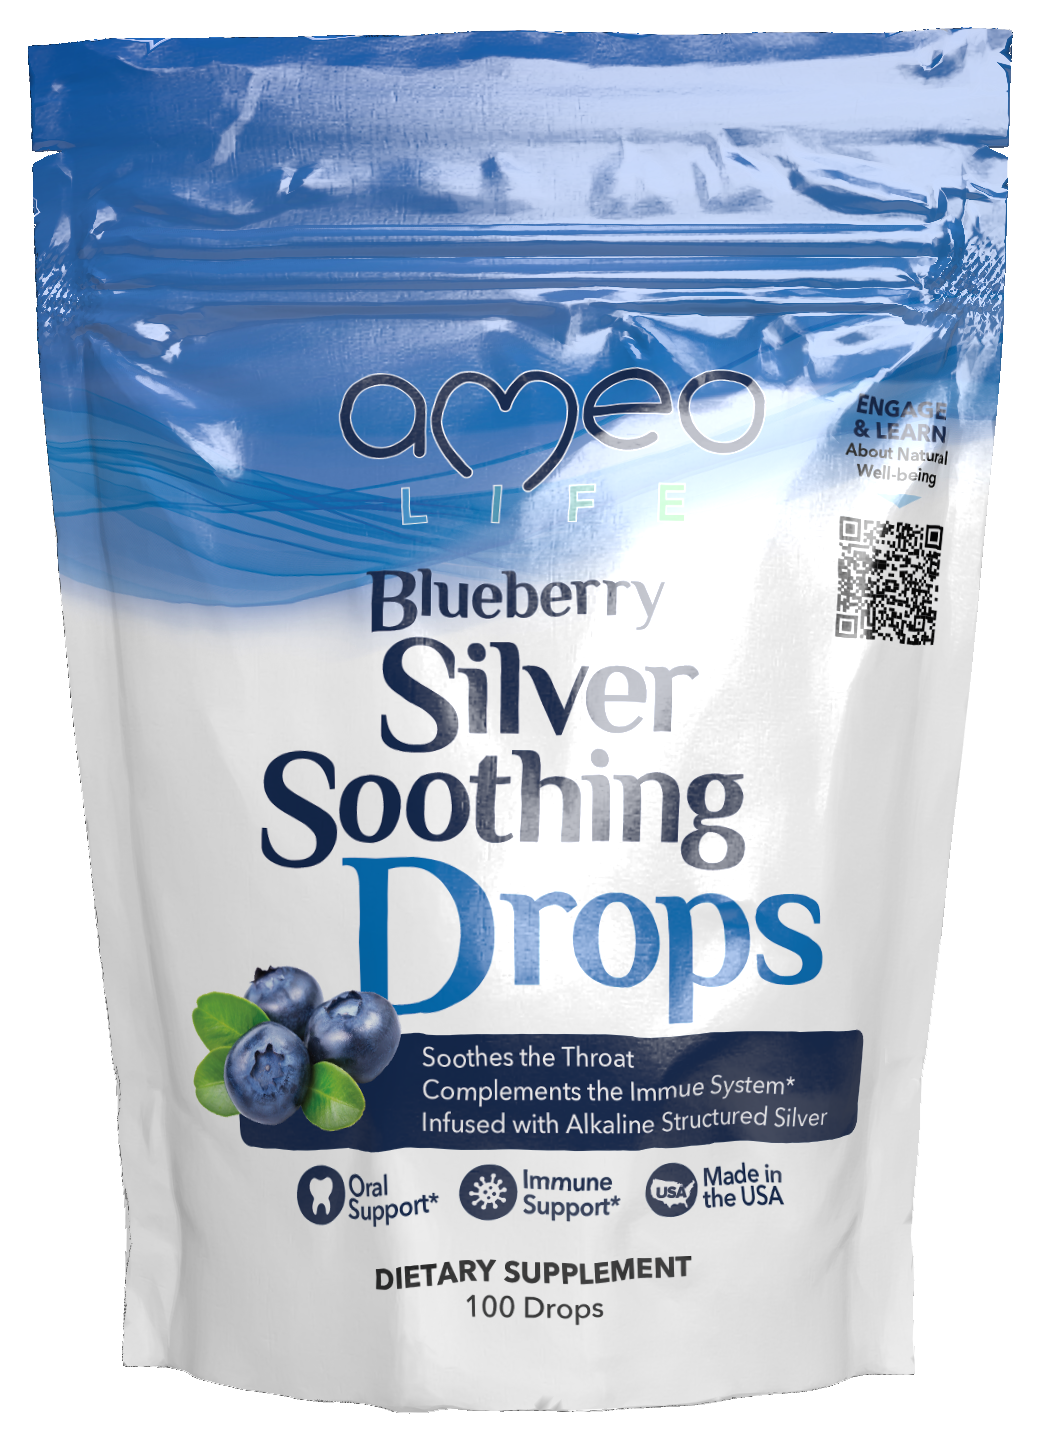 Blueberry Soothing Drops